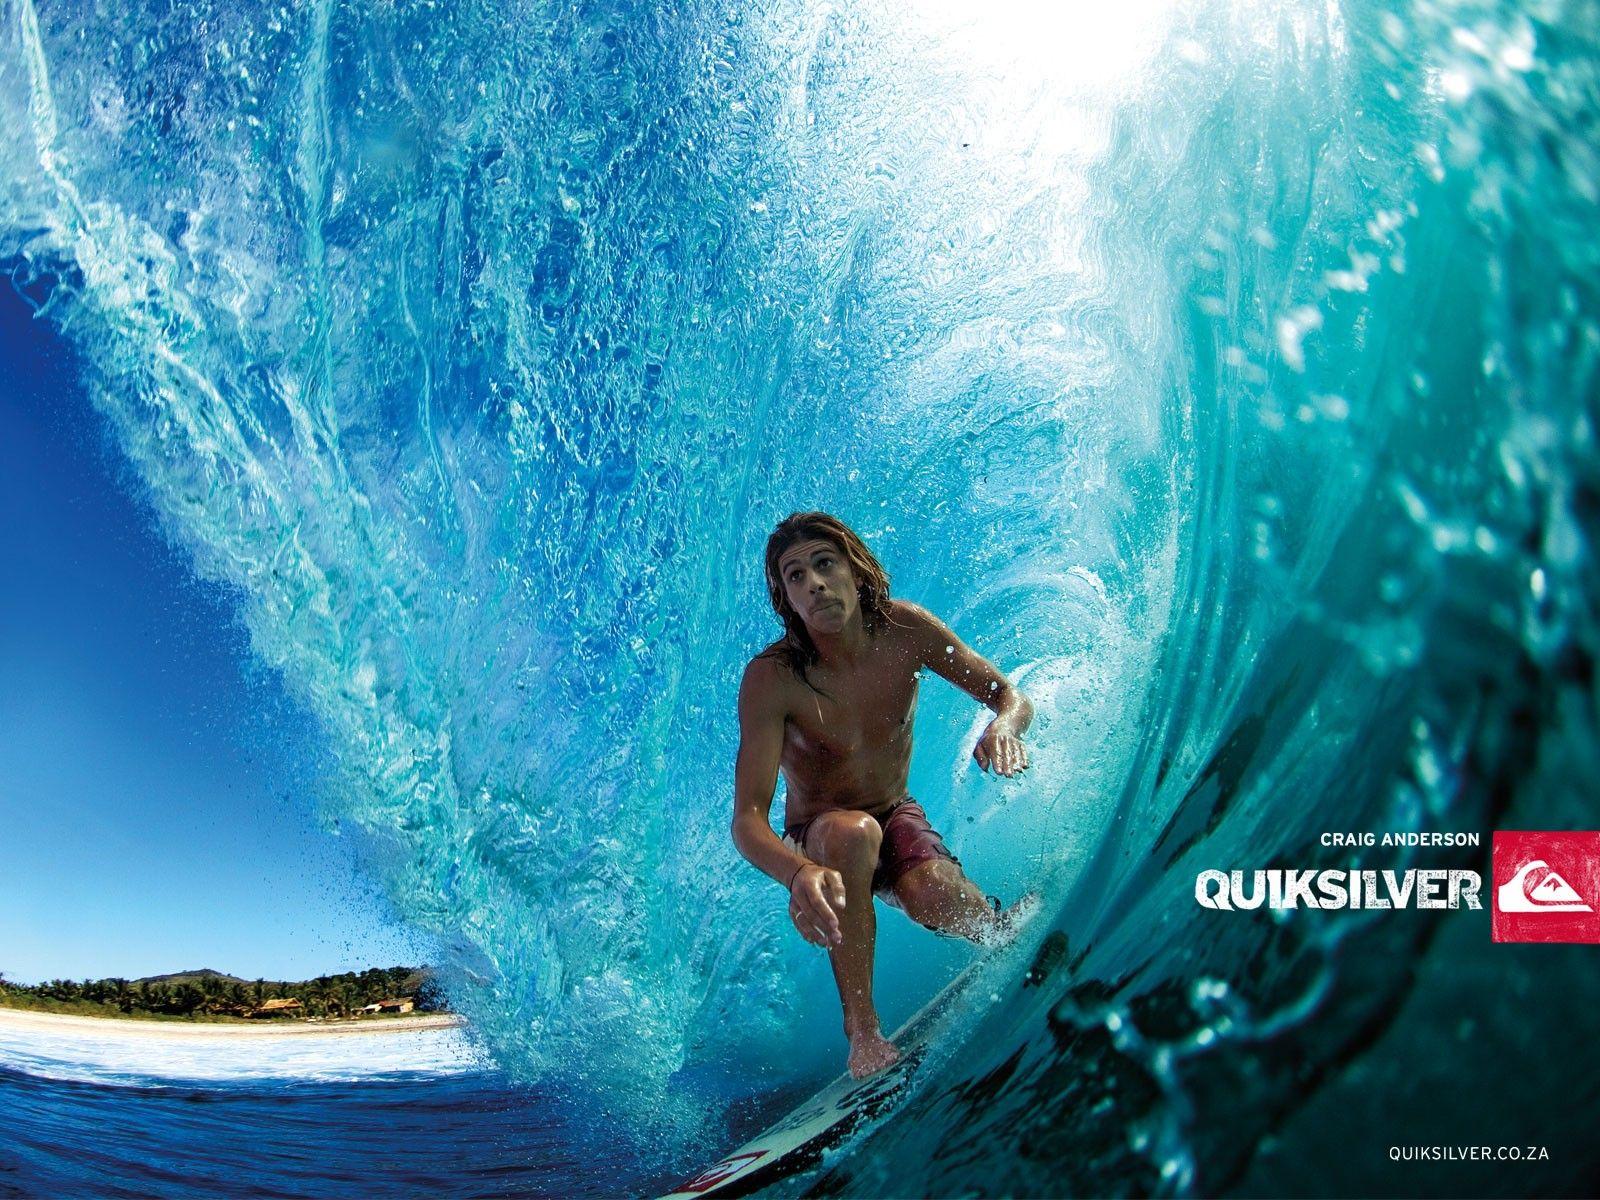 stocks at Quiksilver Wallpaper group